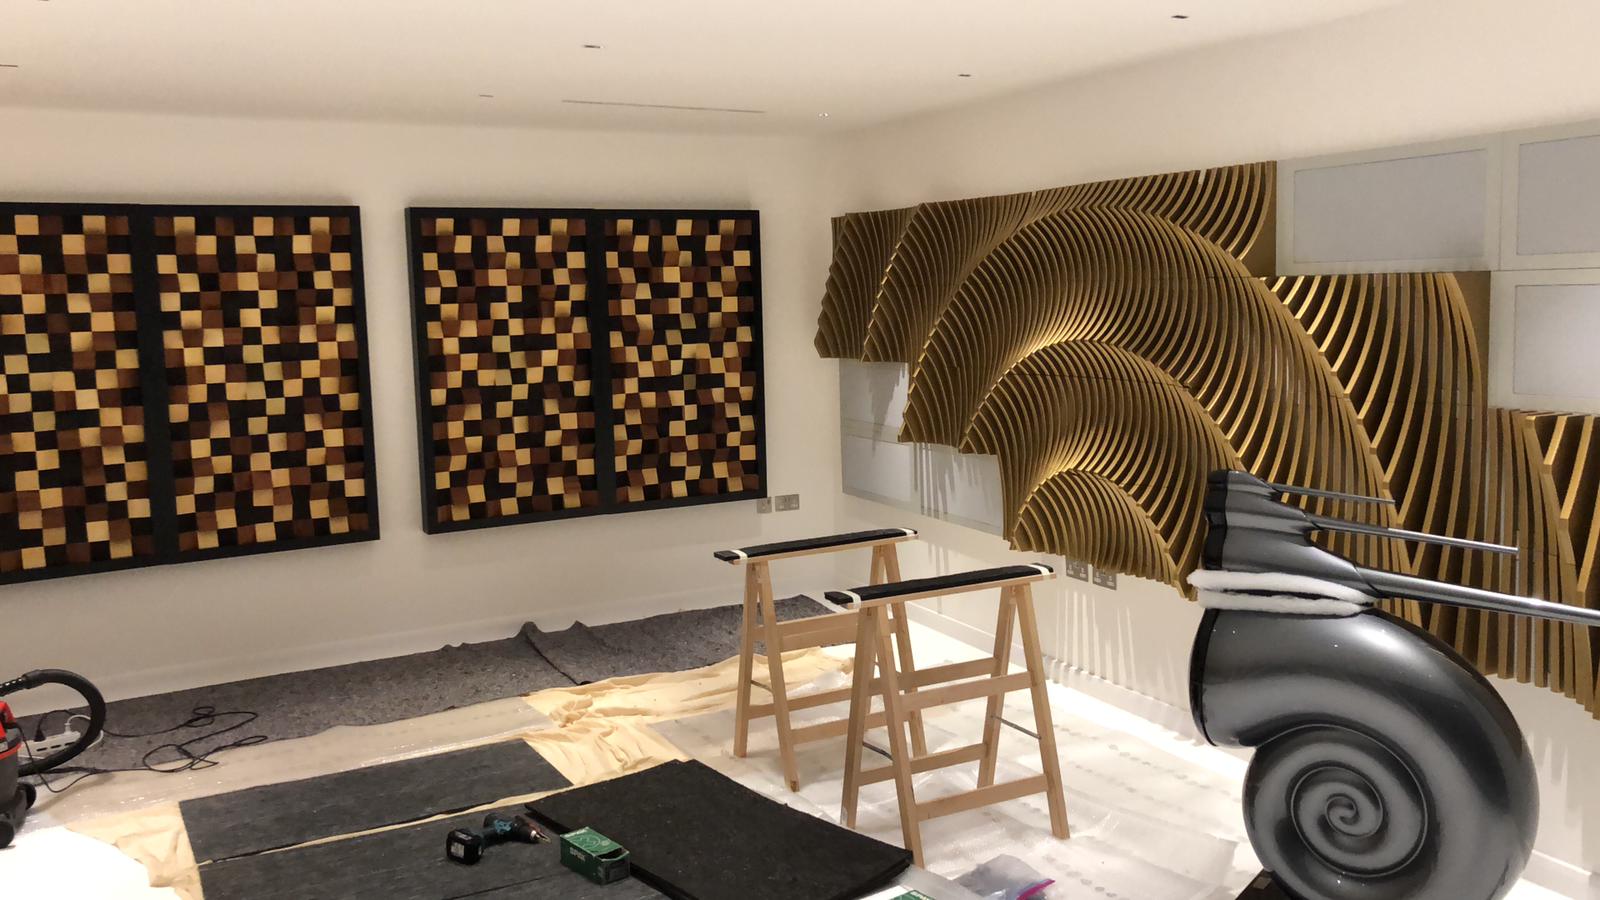 Installation of acoustic treatment in audio room.